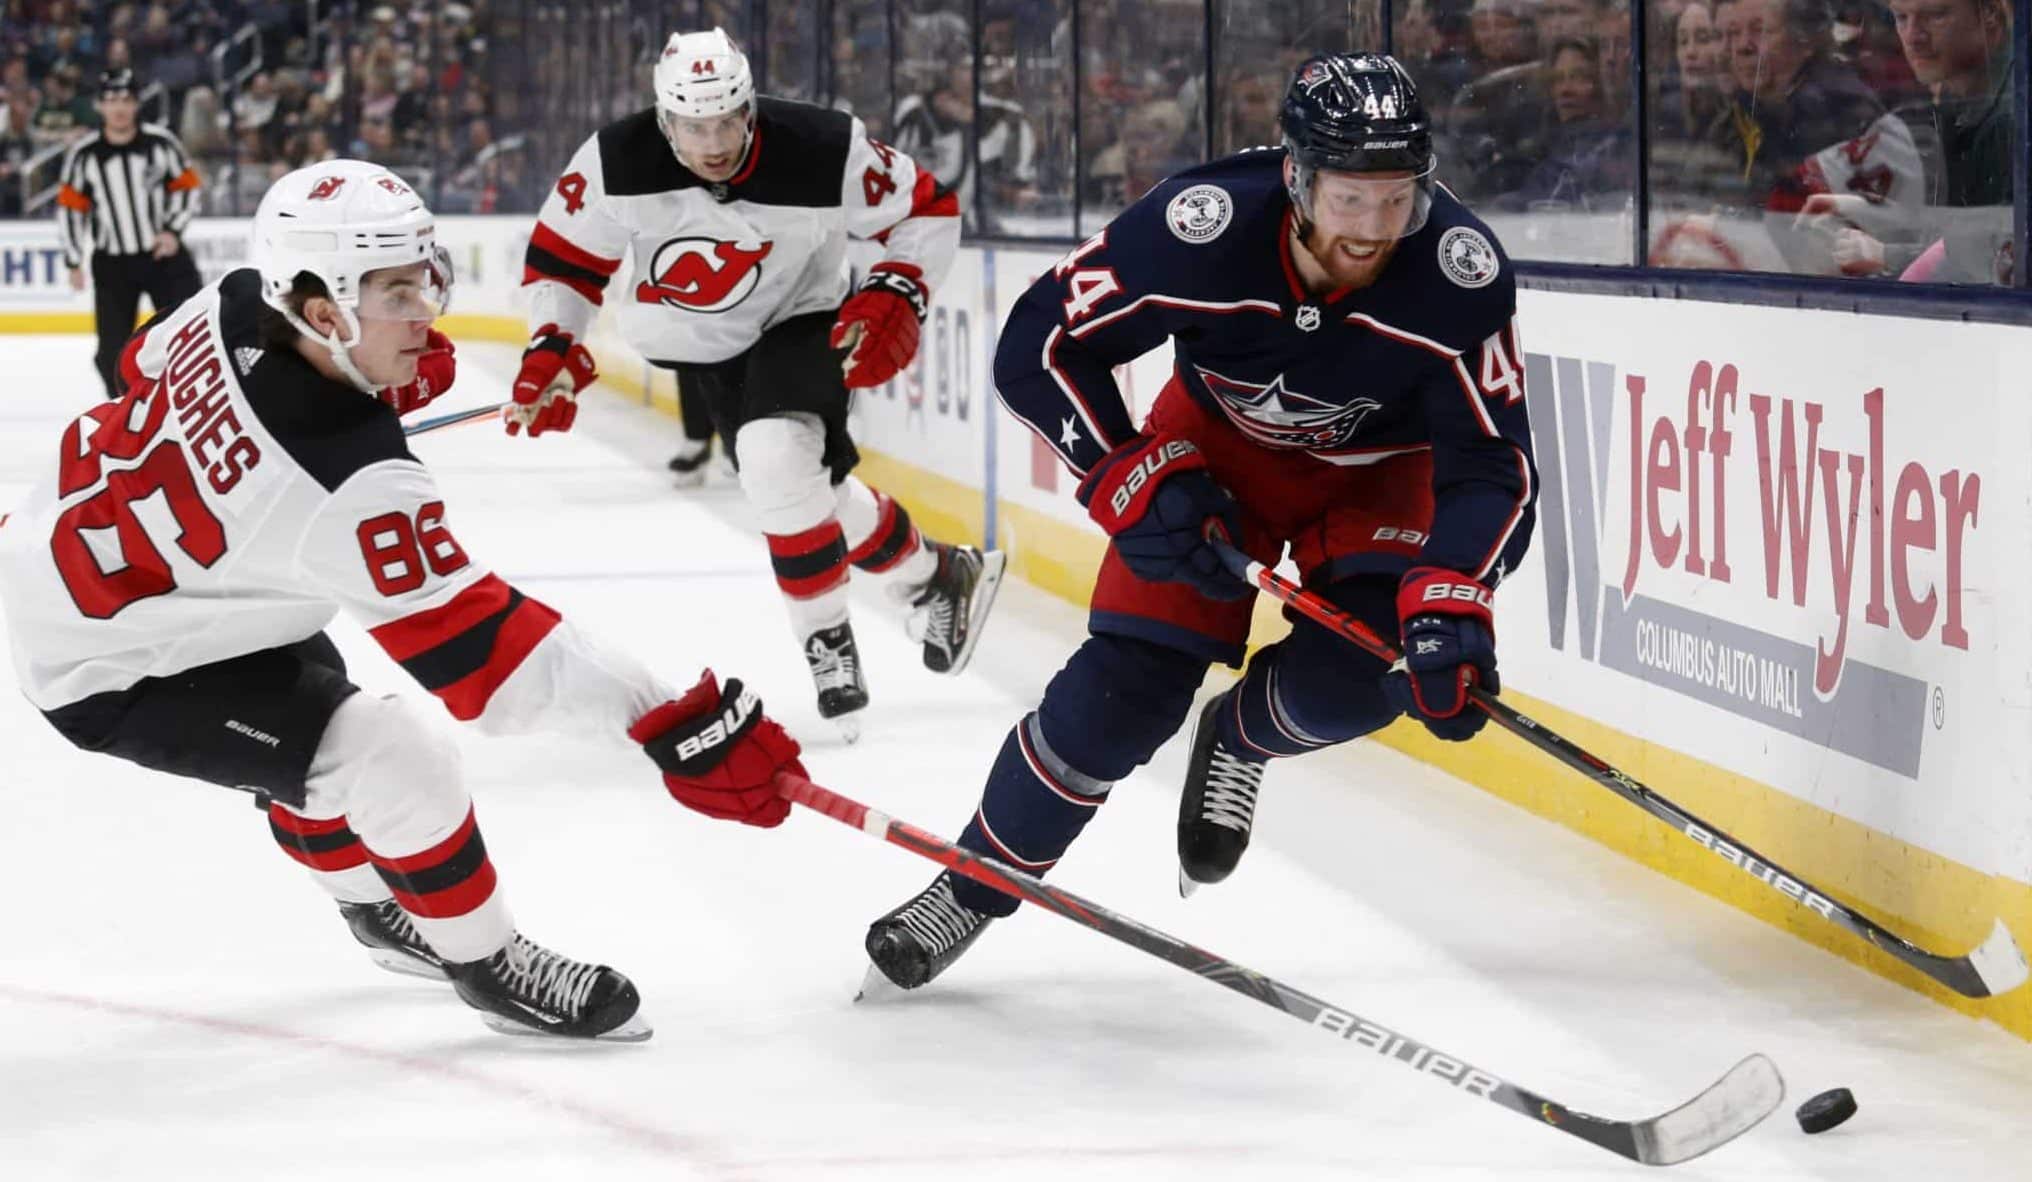 Columbus Blue Jackets defenseman Vladislav Gavrikov, right, of Russia, chases the puck in front of New Jersey forward Jack Hughes, left, and forward Miles Wood Devils during the second period an NHL hockey game in Columbus, Ohio, Saturday, Jan. 18, 2020.